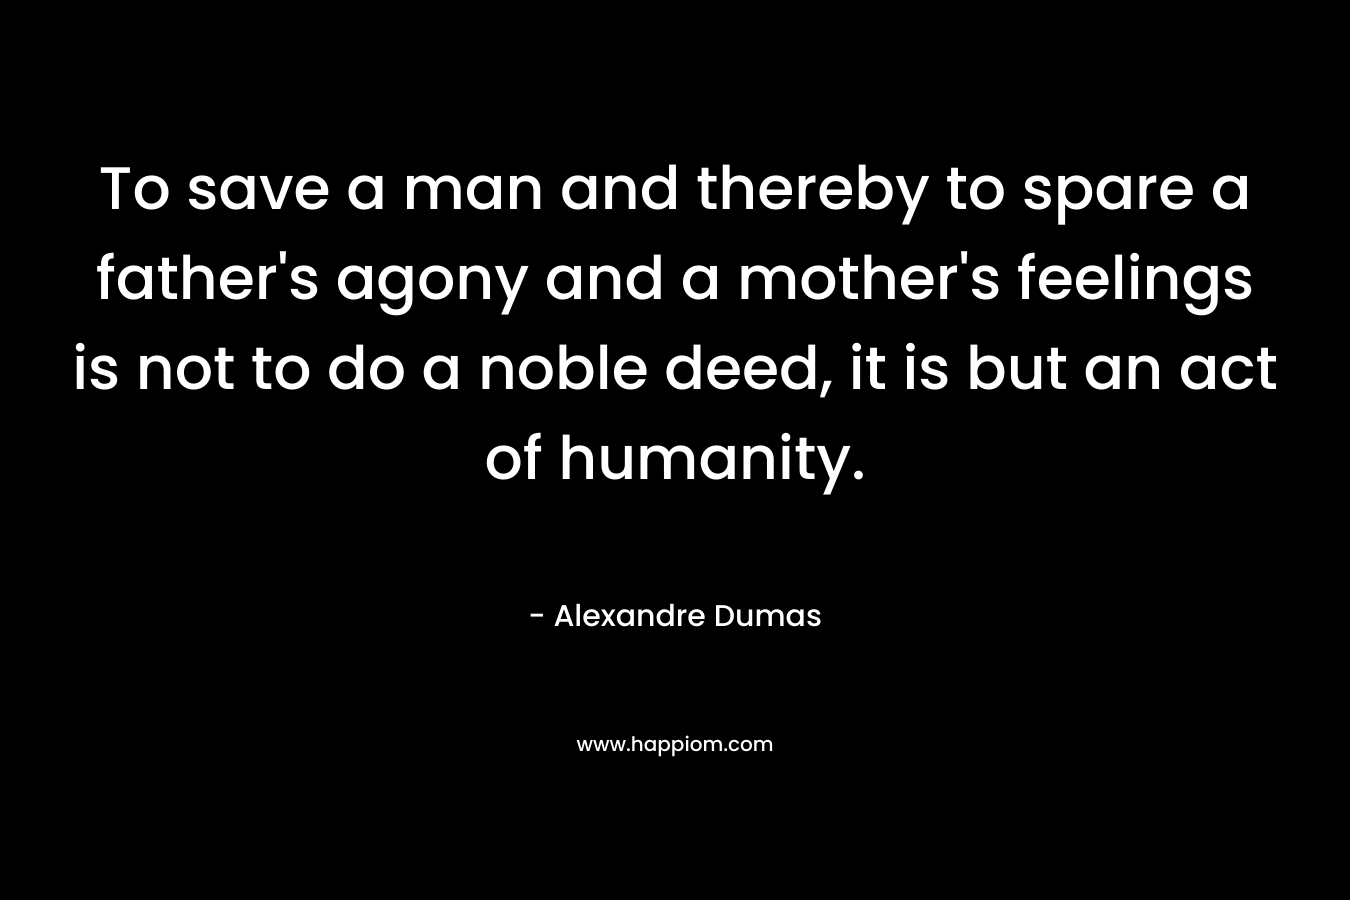 To save a man and thereby to spare a father’s agony and a mother’s feelings is not to do a noble deed, it is but an act of humanity. – Alexandre Dumas